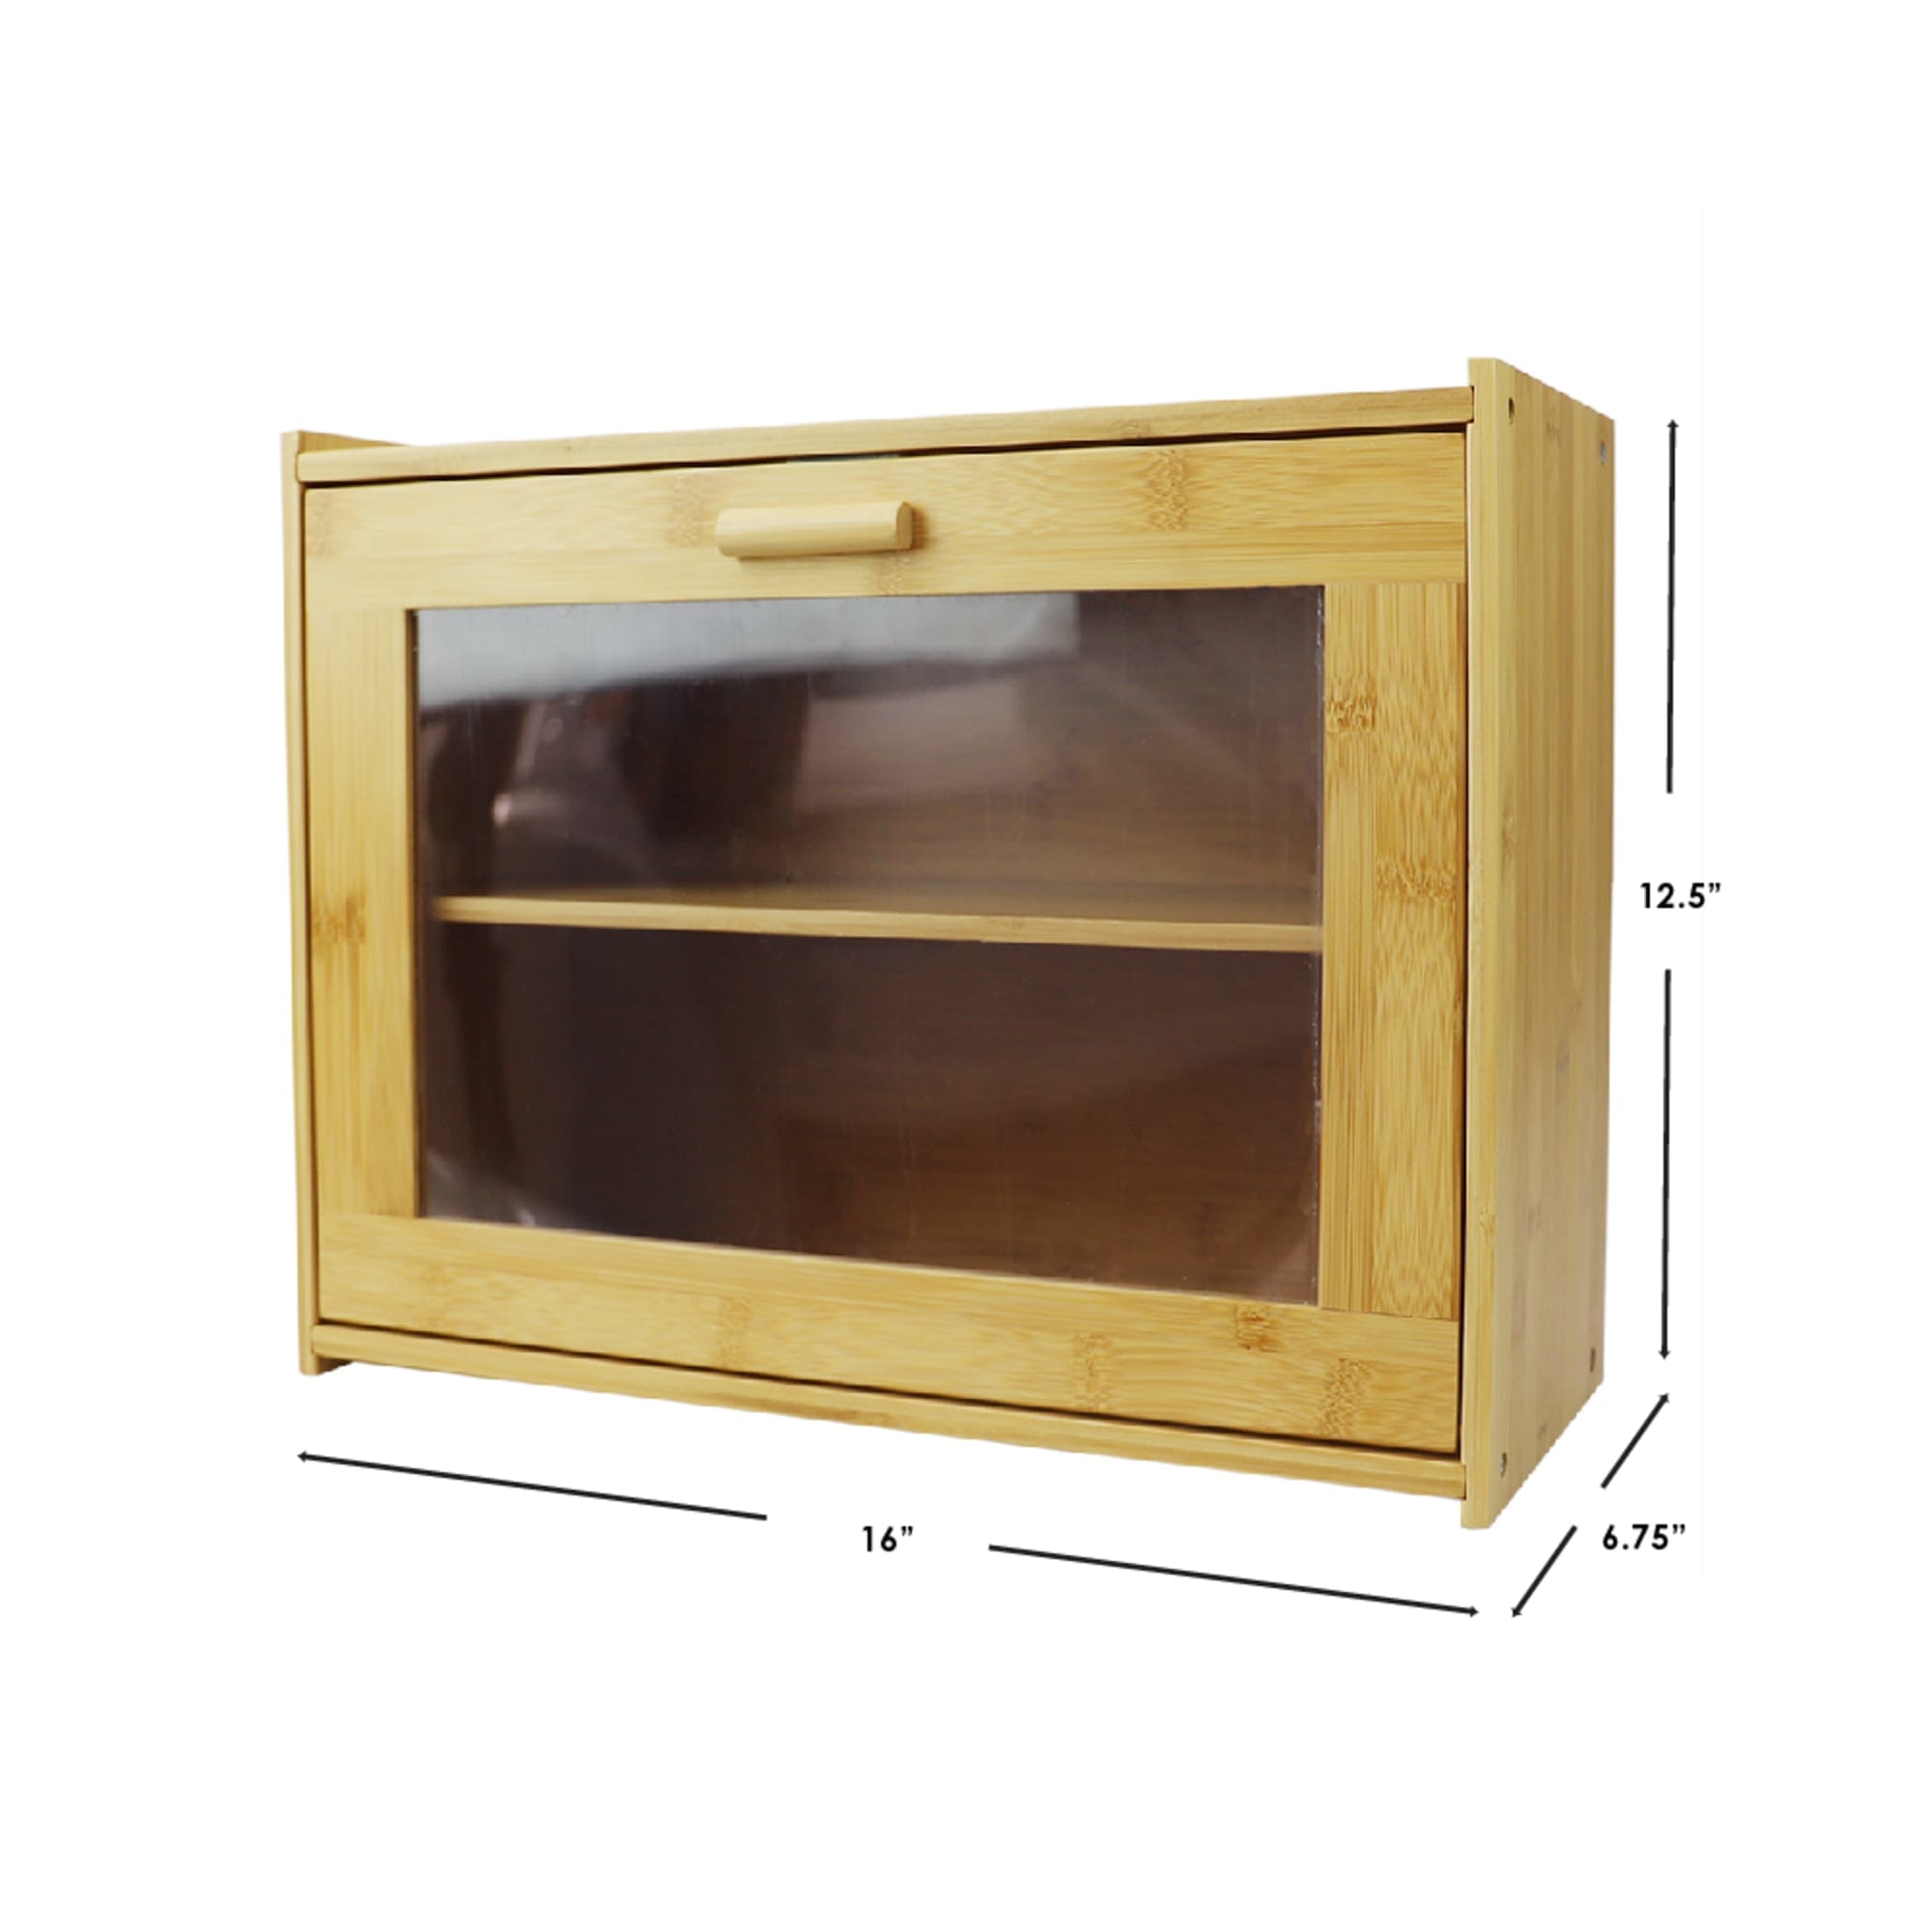 Home Basics 2 Tier Bamboo Bread Box with Peek-Through Acetate Window, Natural $35.00 EACH, CASE PACK OF 4